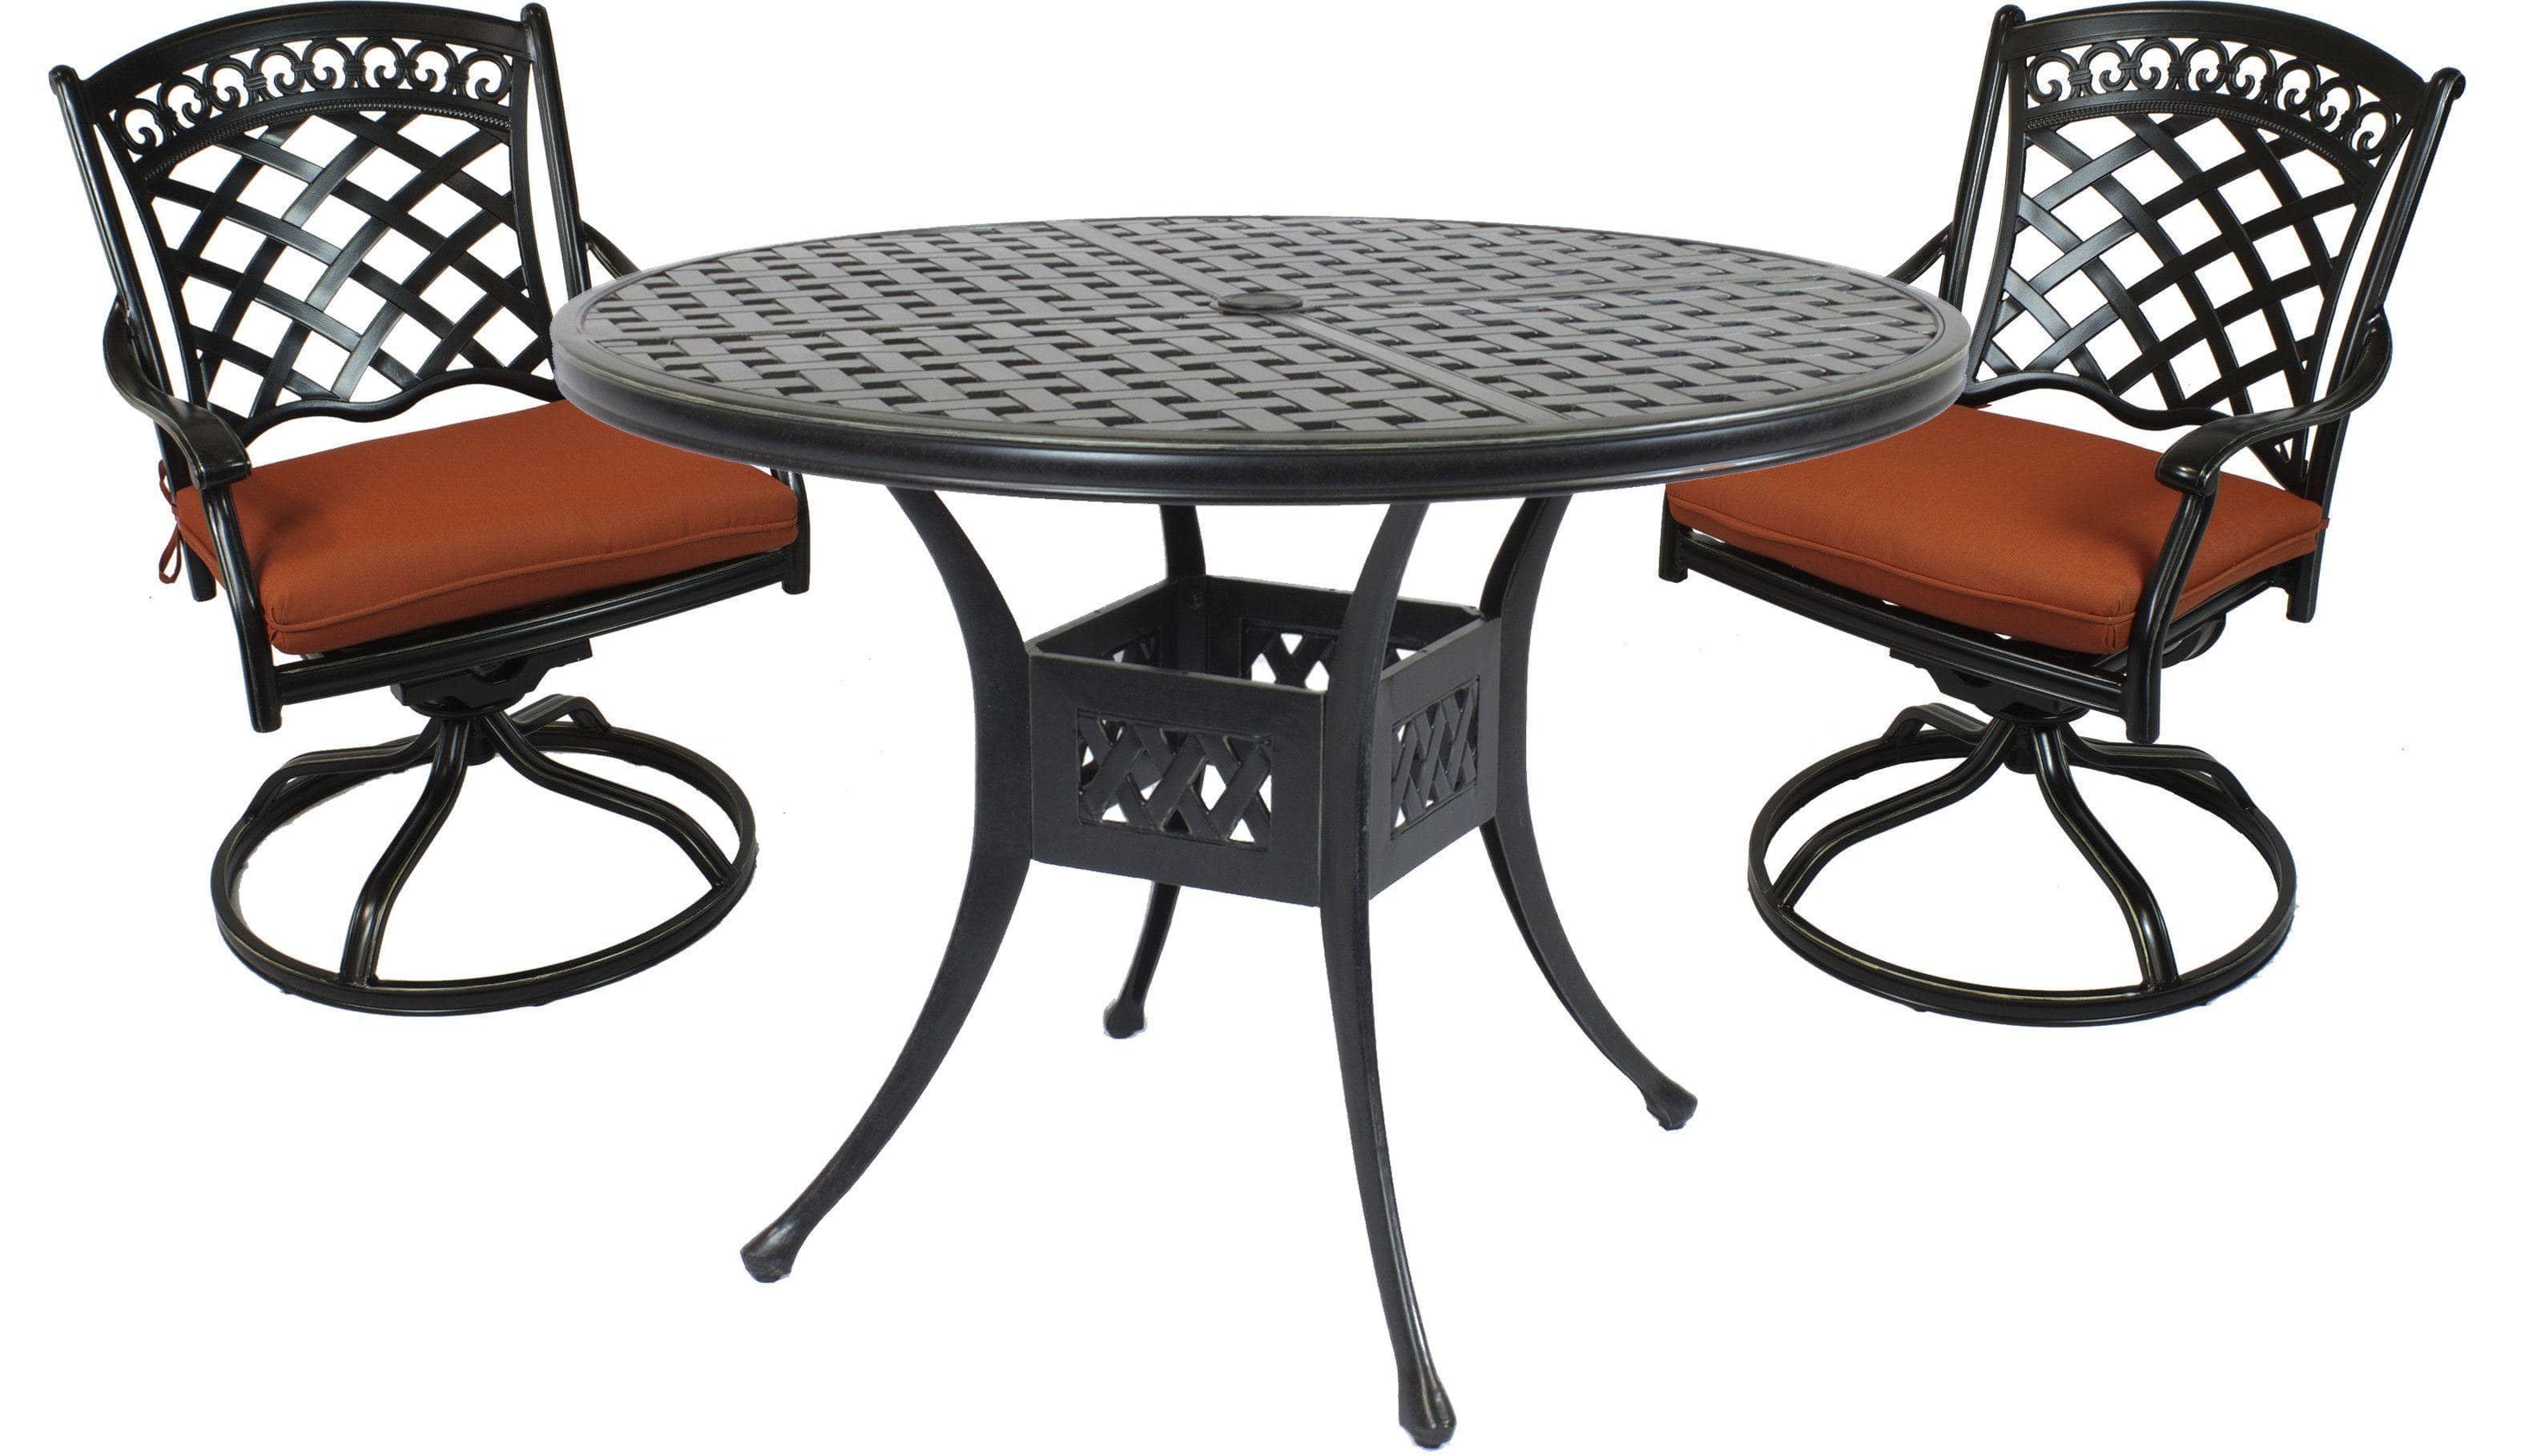 Lawton Casual Comfort Outdoor Dining Set Lawton Casual Comfort - Cast Aluminum 3 PC Dining Set with 42" Round Table and 2 Swivel Rocker Chairs